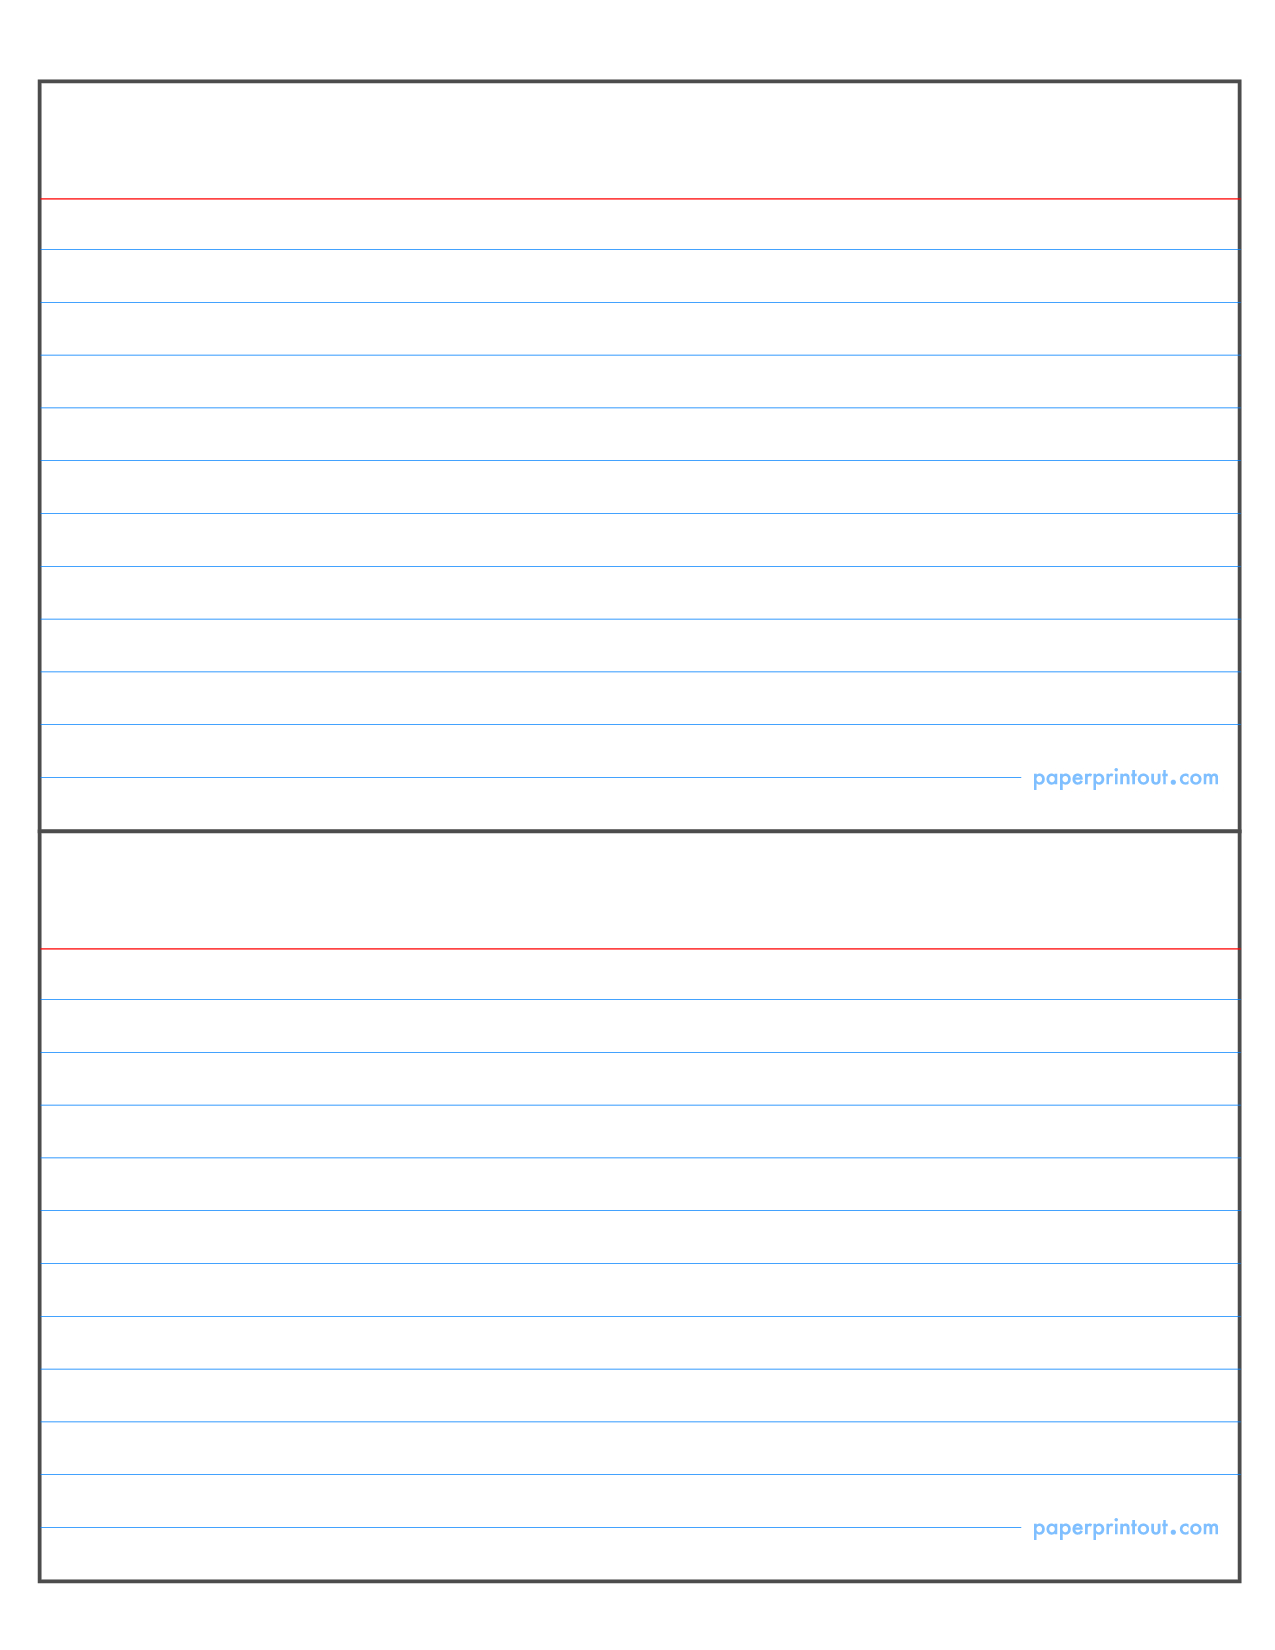 Index Card Template | E Commercewordpress With Regard To Index Card Template For Word